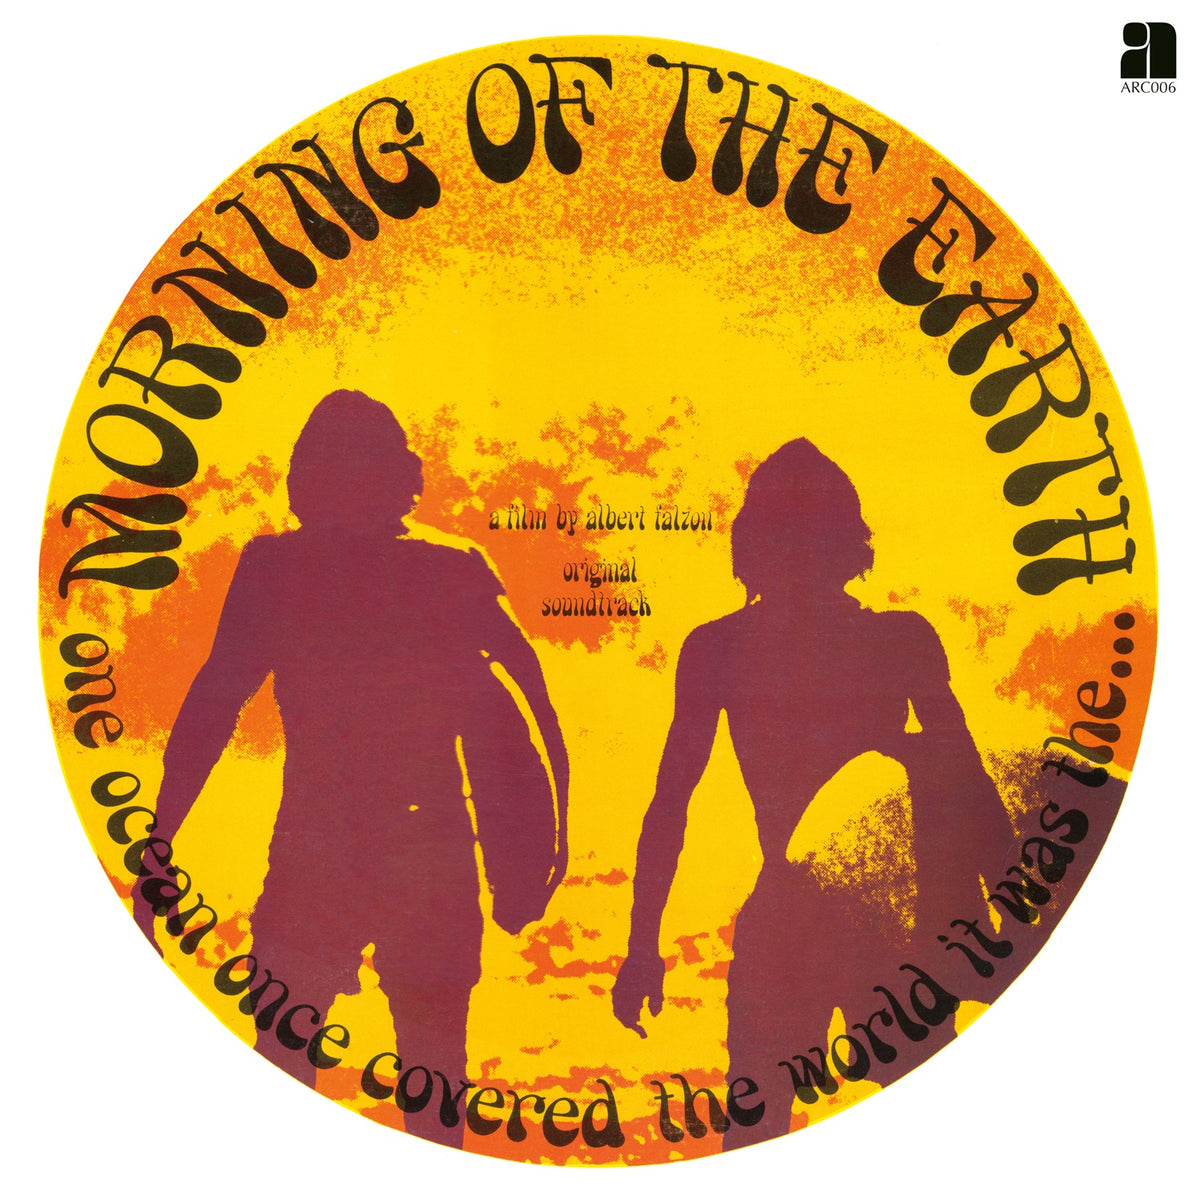 Morning of the Earth legendary movie cover